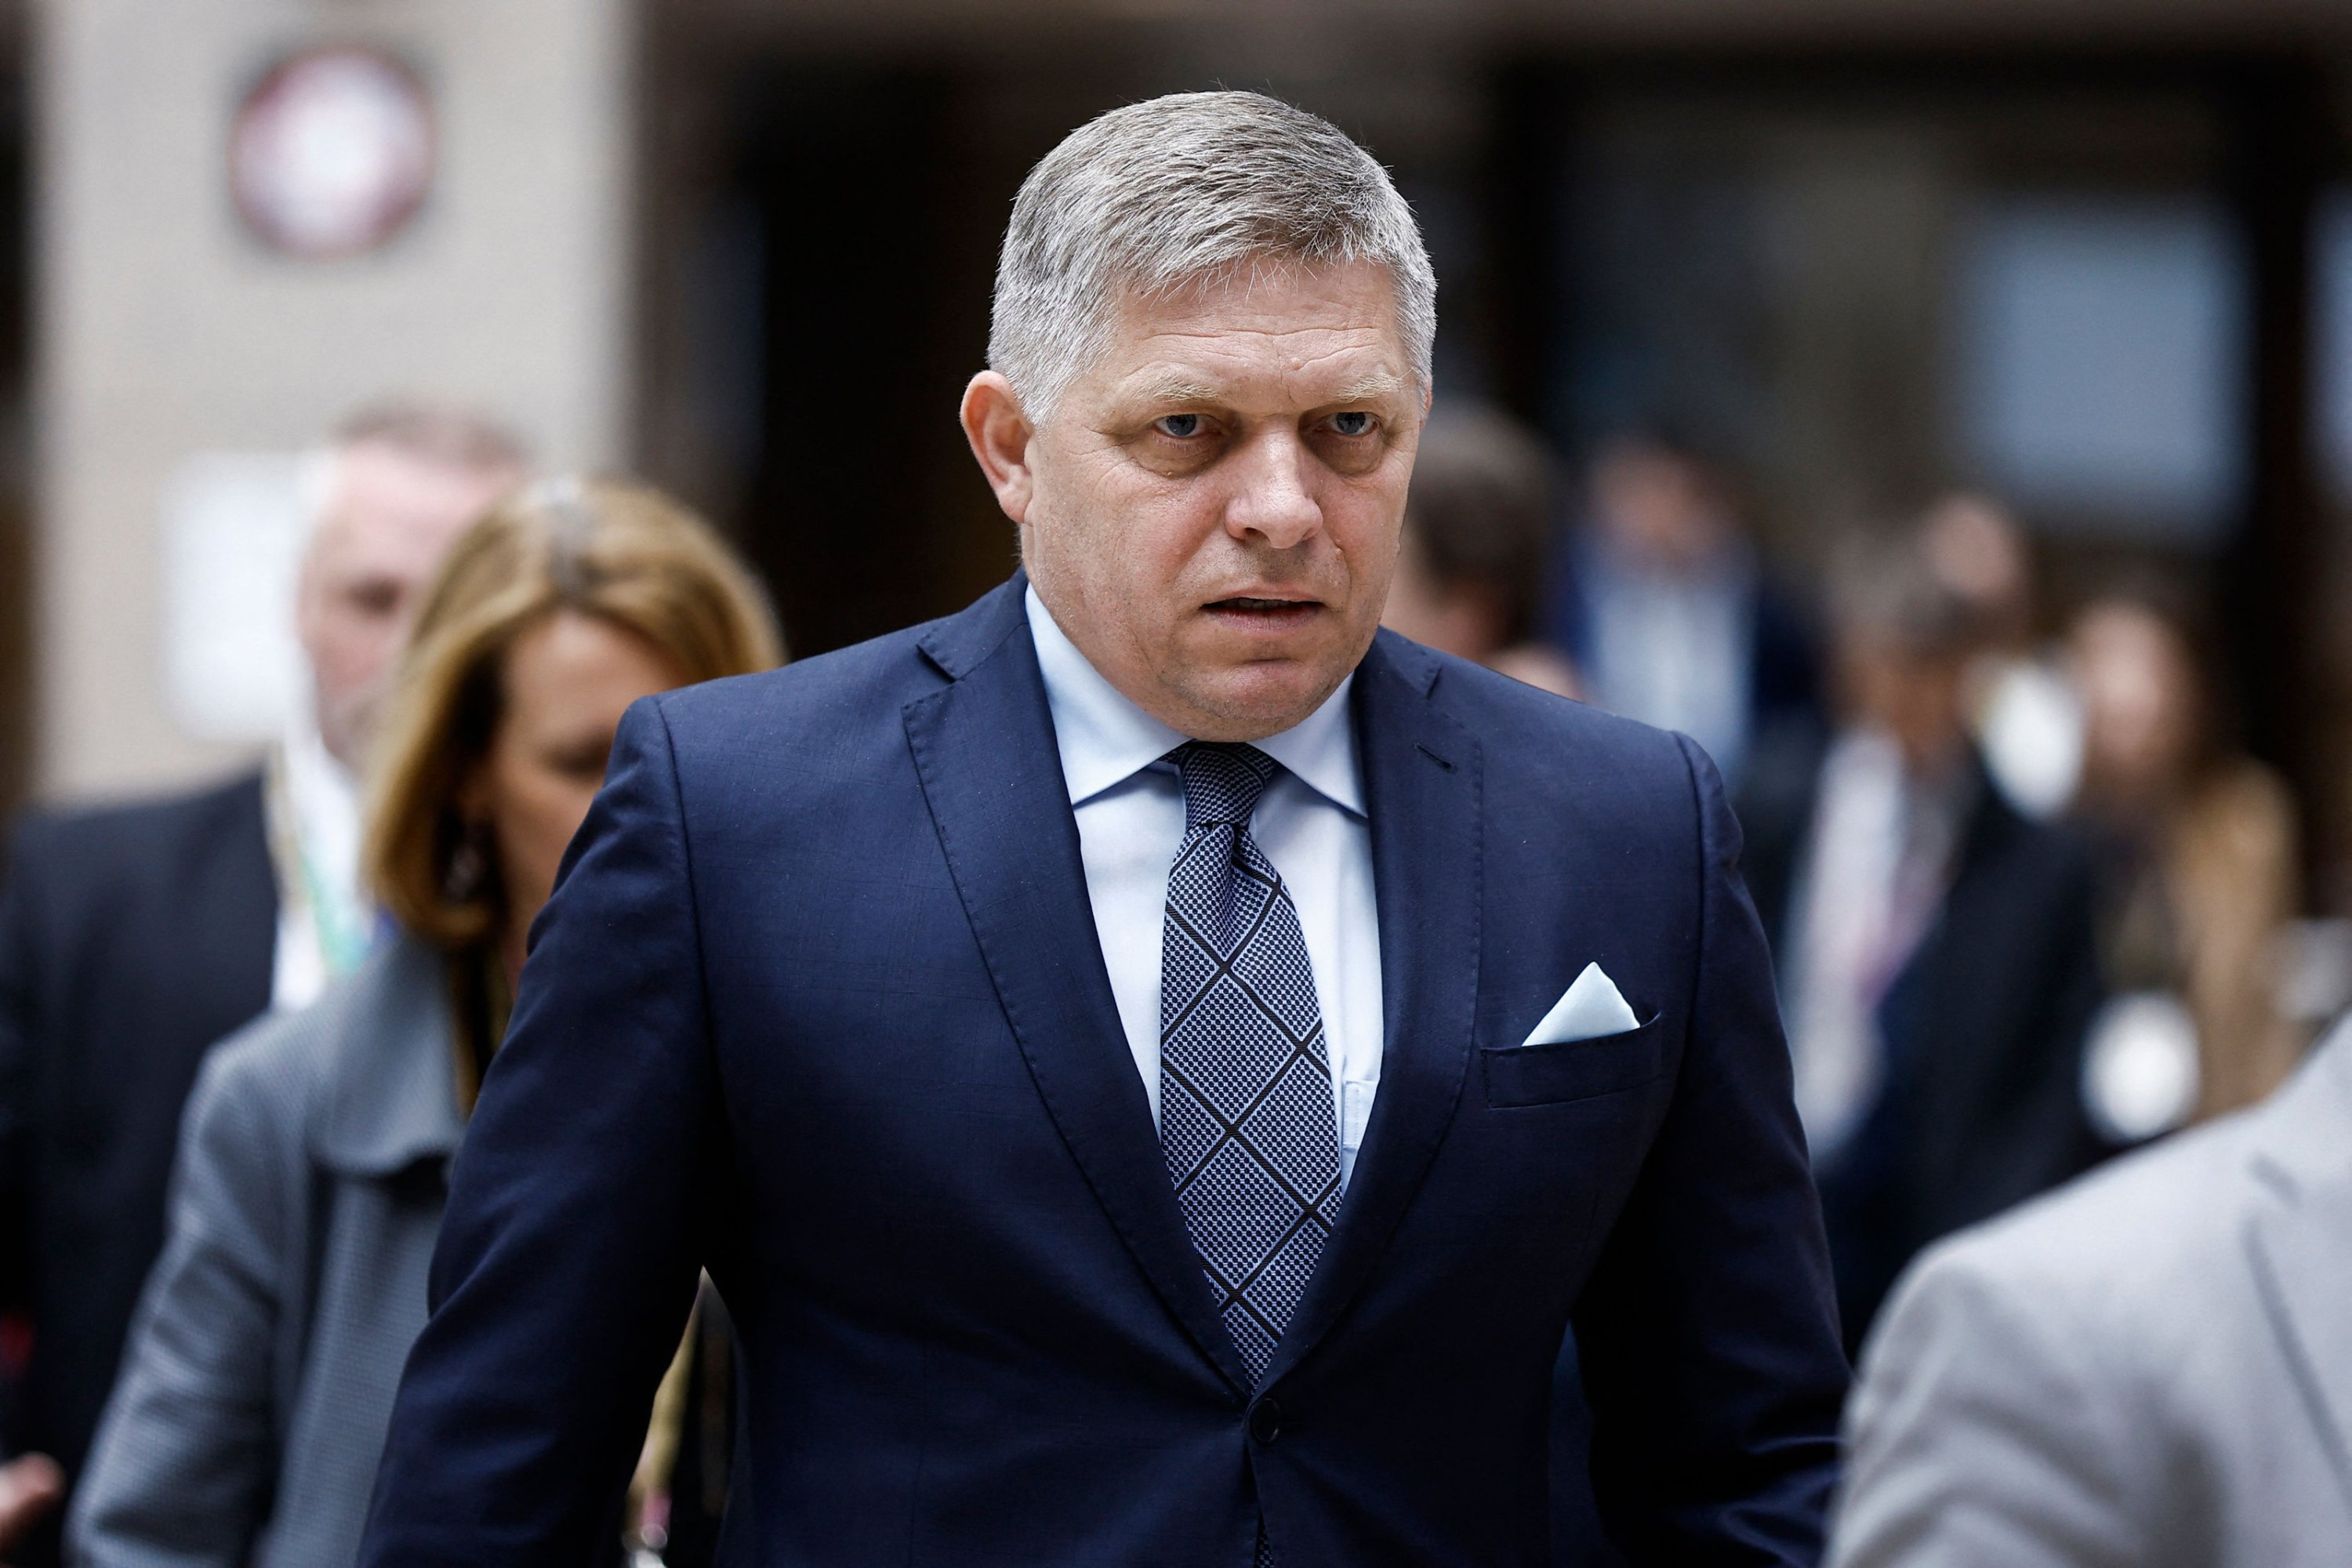 Slovak PM's condition forecasted to improve